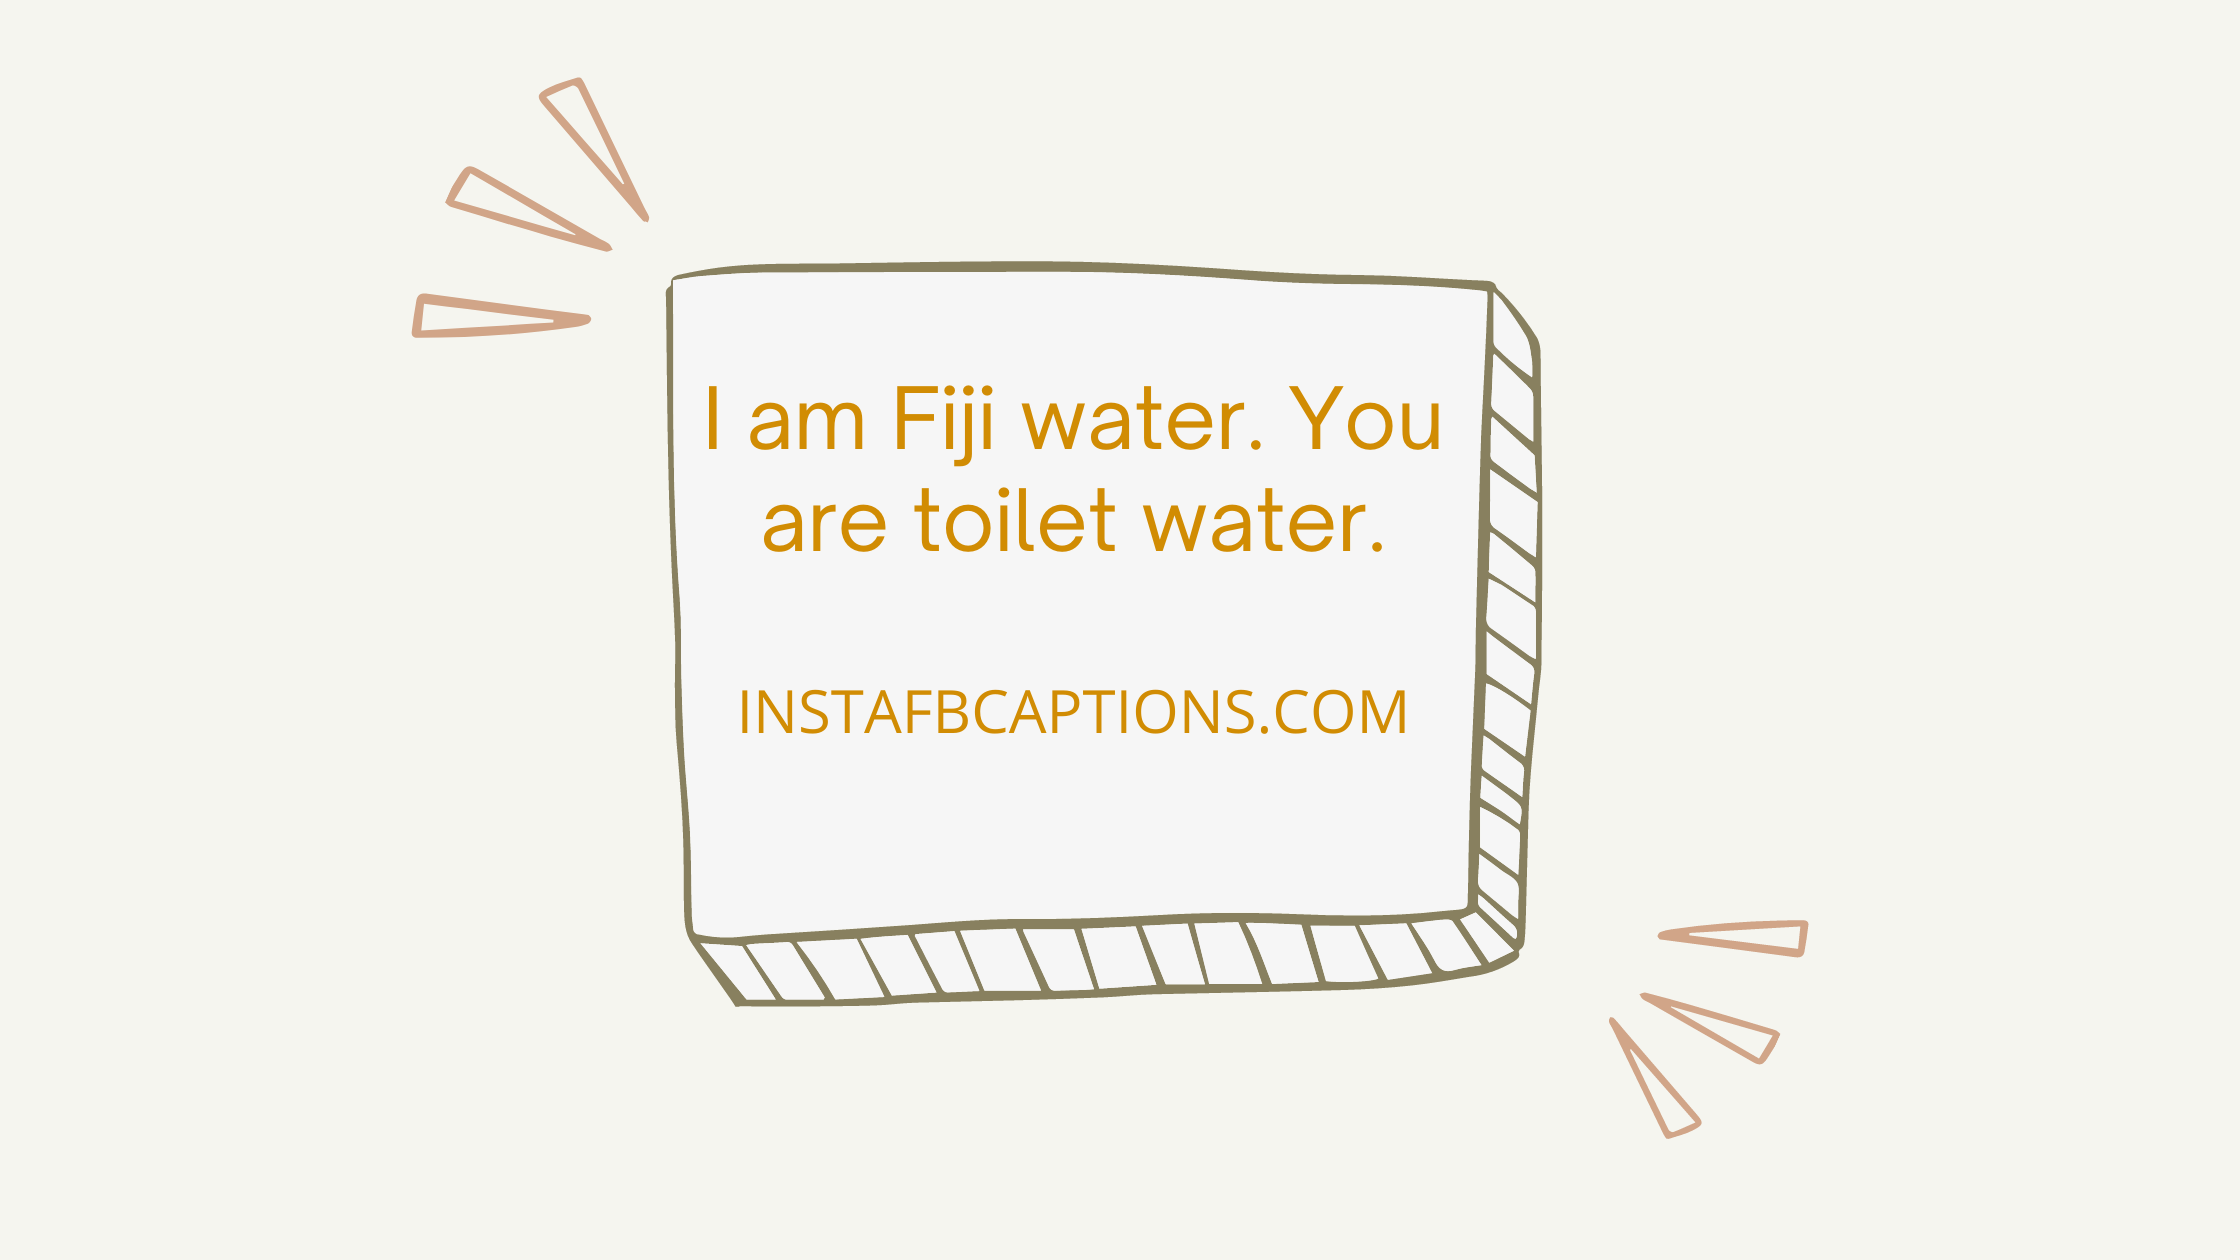 I am Fiji water. You are toilet water. captions to make your ex jealous - Savage Captions for Ex - 125 Savage Captions to Make Your Ex Feel Insecure Without You